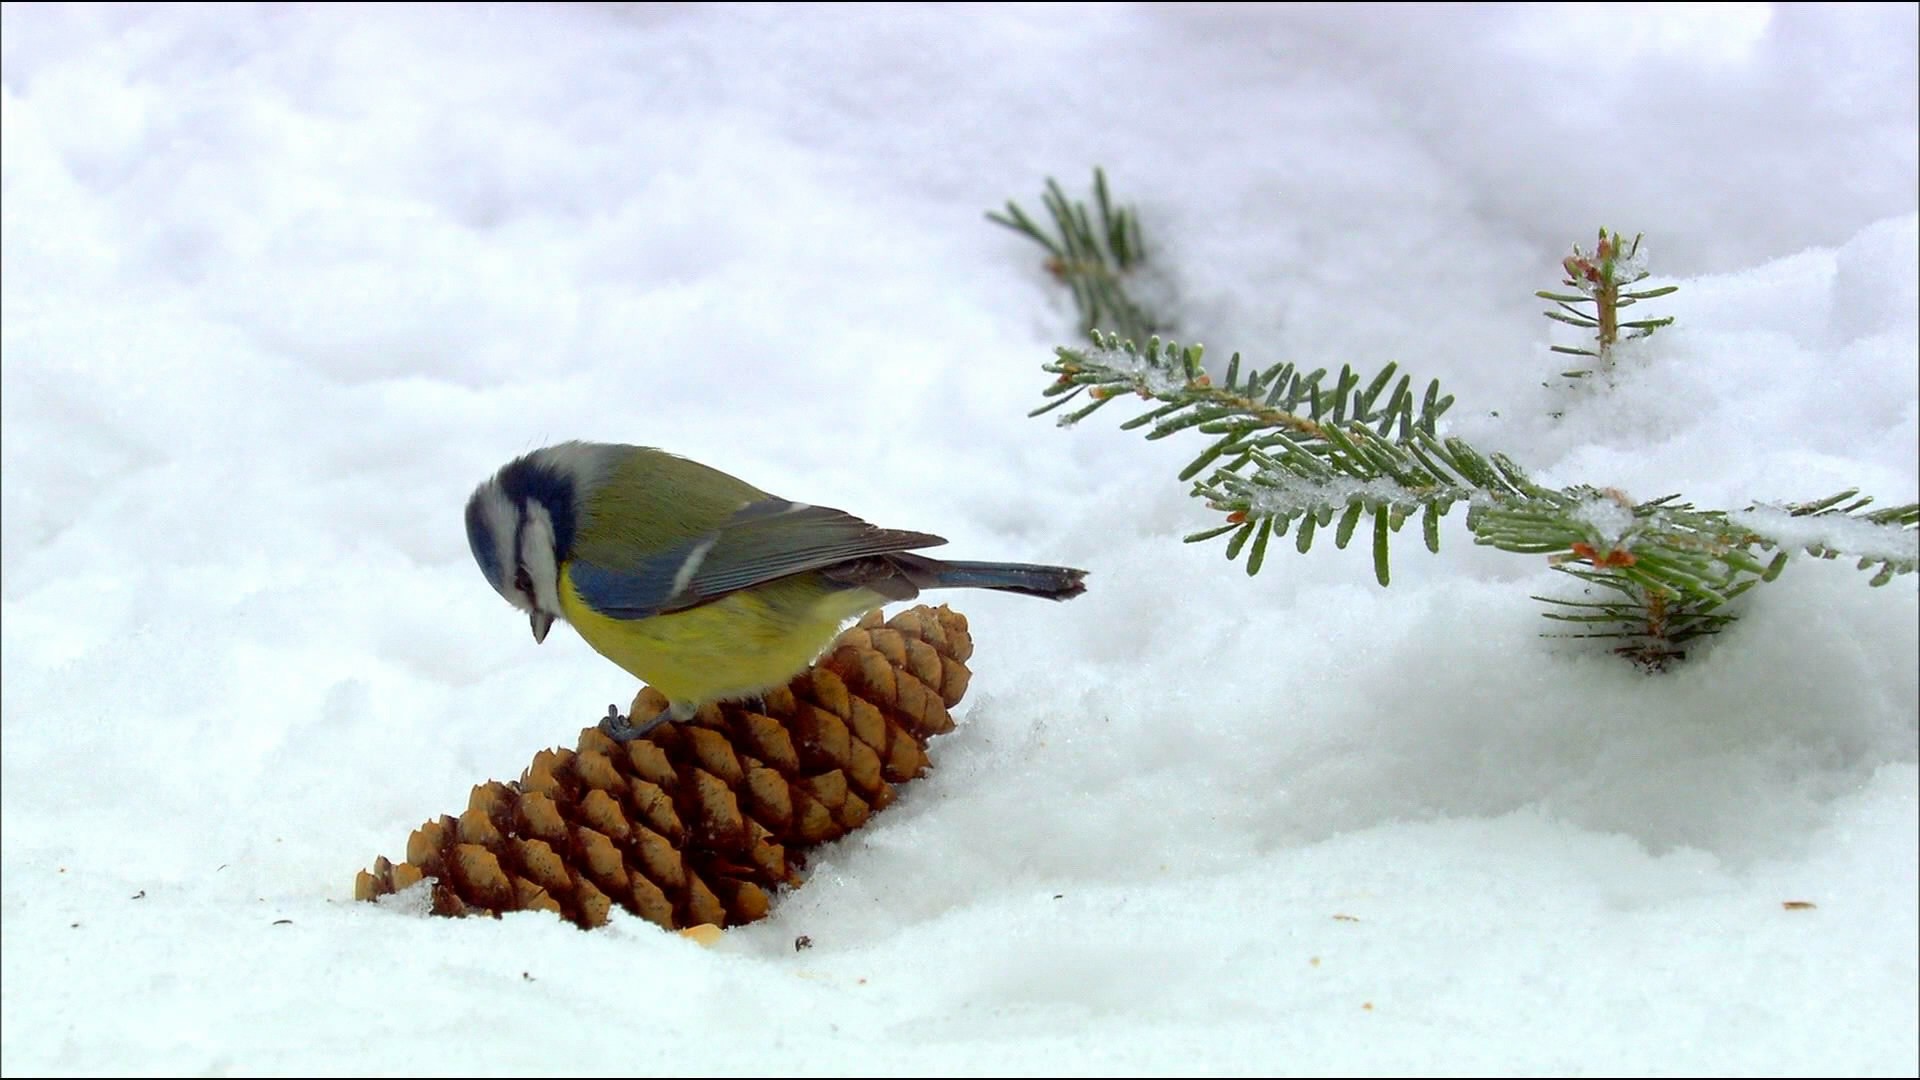 General 1920x1080 animals birds snow titmouse winter plants cold outdoors nature pine cones